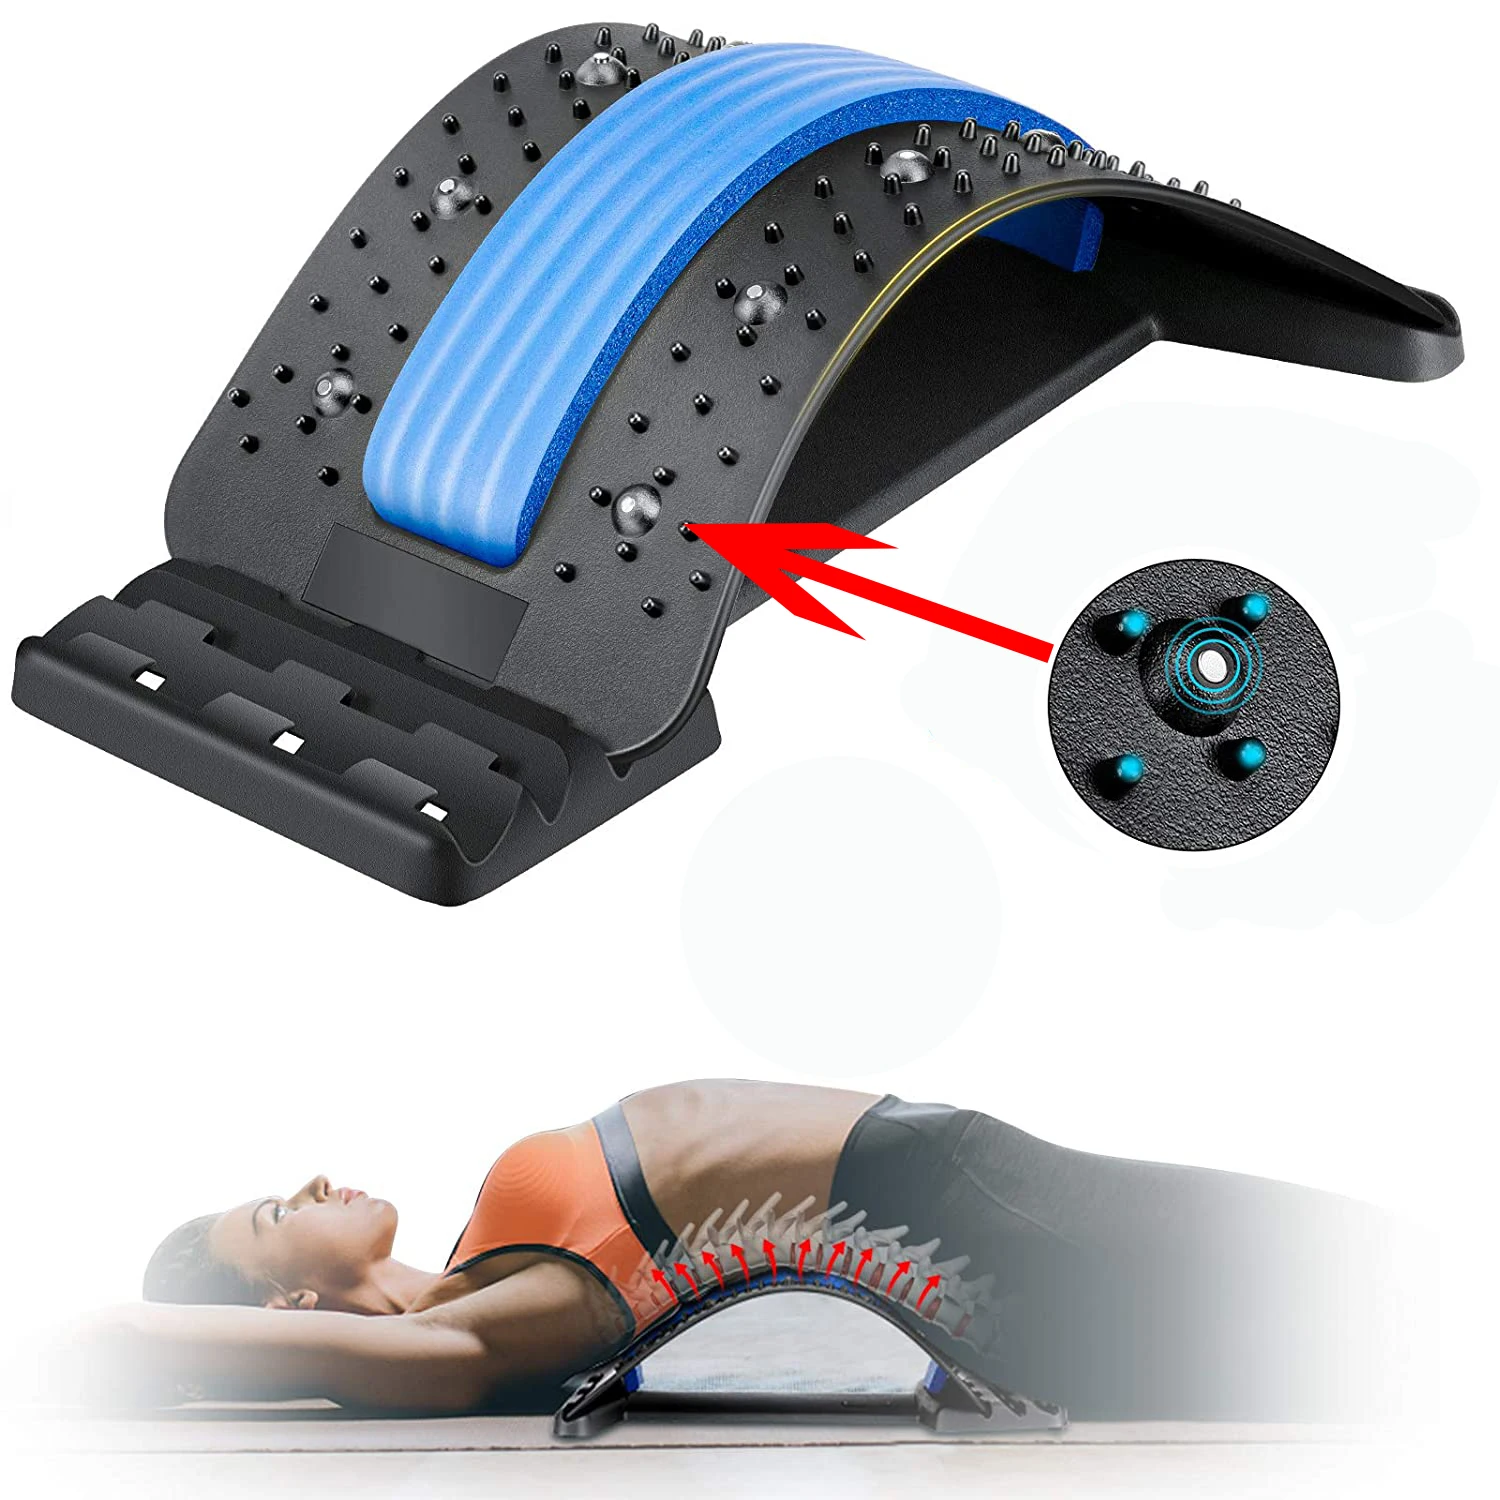 

Best Orthopedic Lumbar Relief Posture Therapy Back Stretcher with Good Reviews, Black/green,black/purple,black/blue,black/pink,black/red